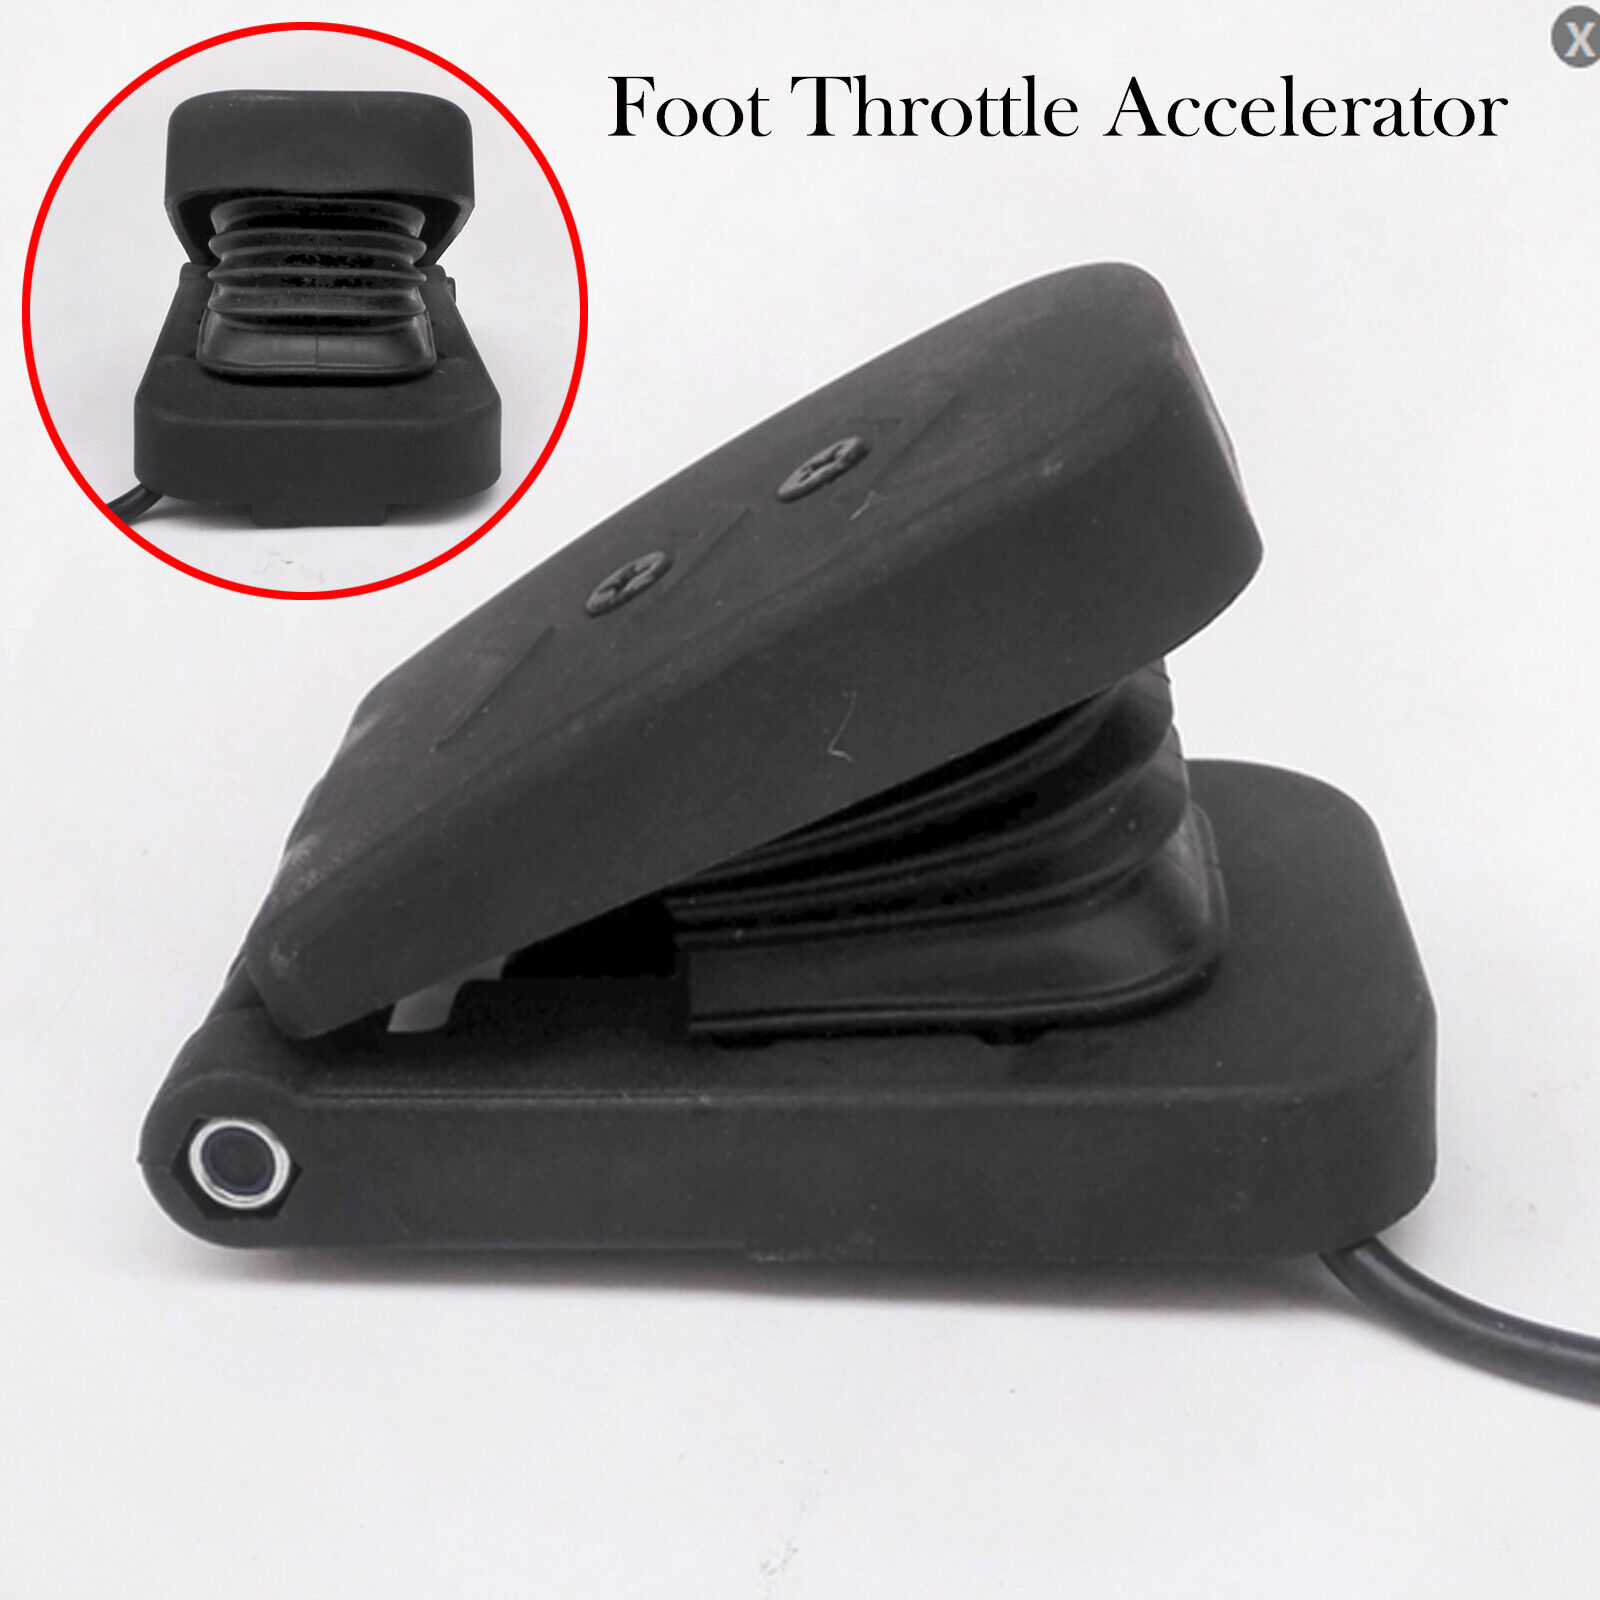 Electric Car Vehicle Foot Throttle Accelerator Pedal for E-Bike/ Boat/ Scooter H